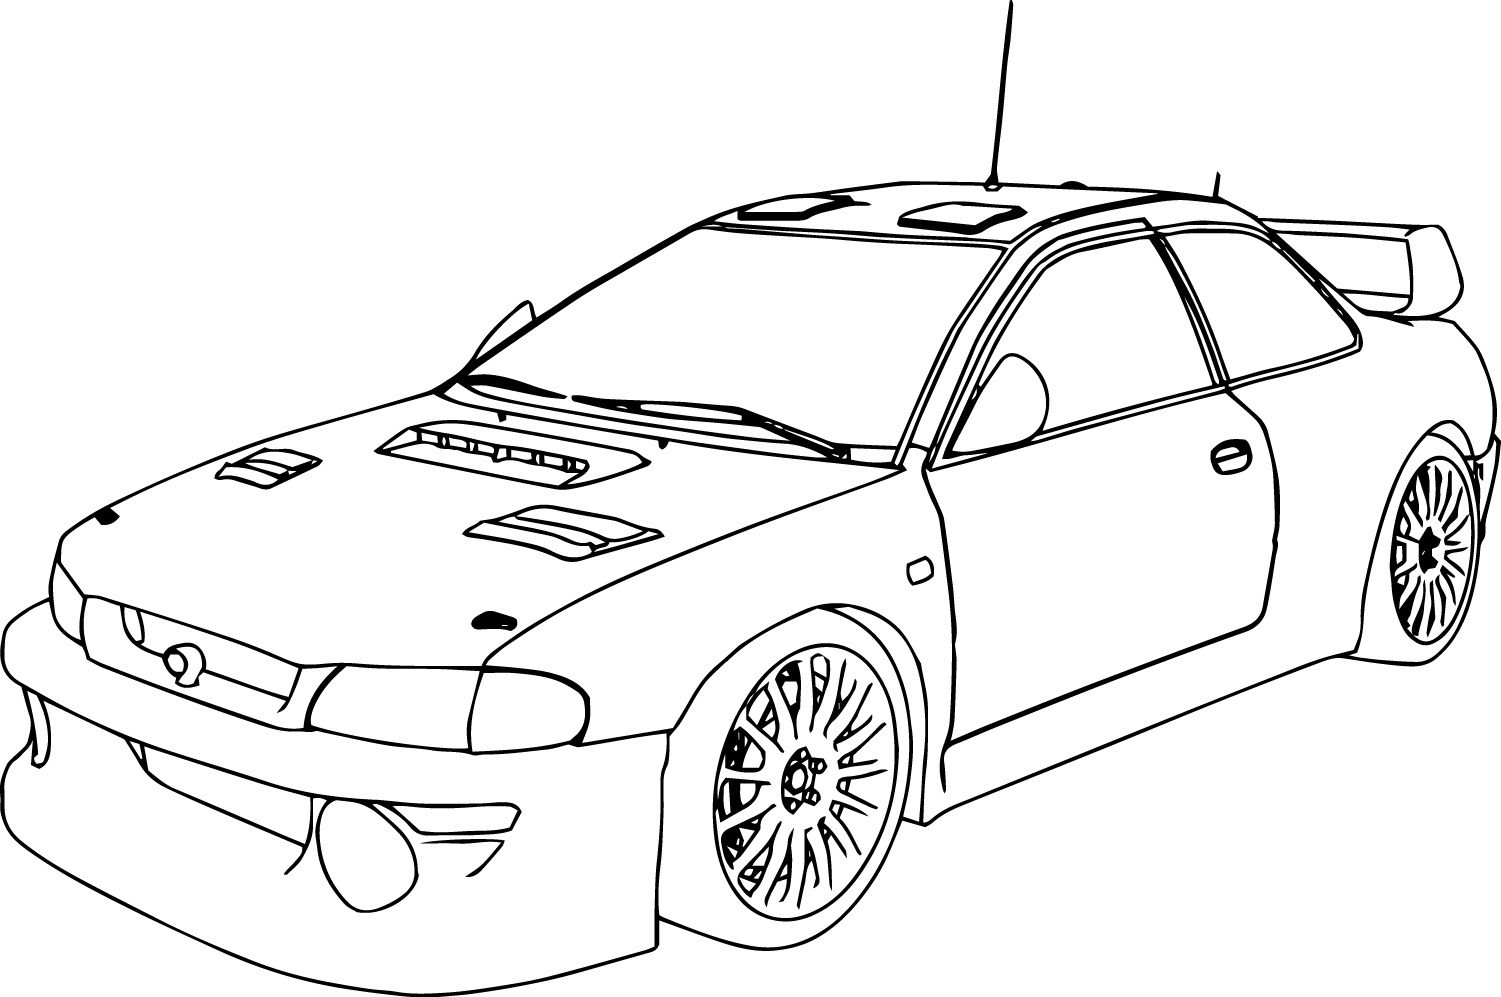 Car Coloring Pages For Adults at GetColorings.com | Free printable